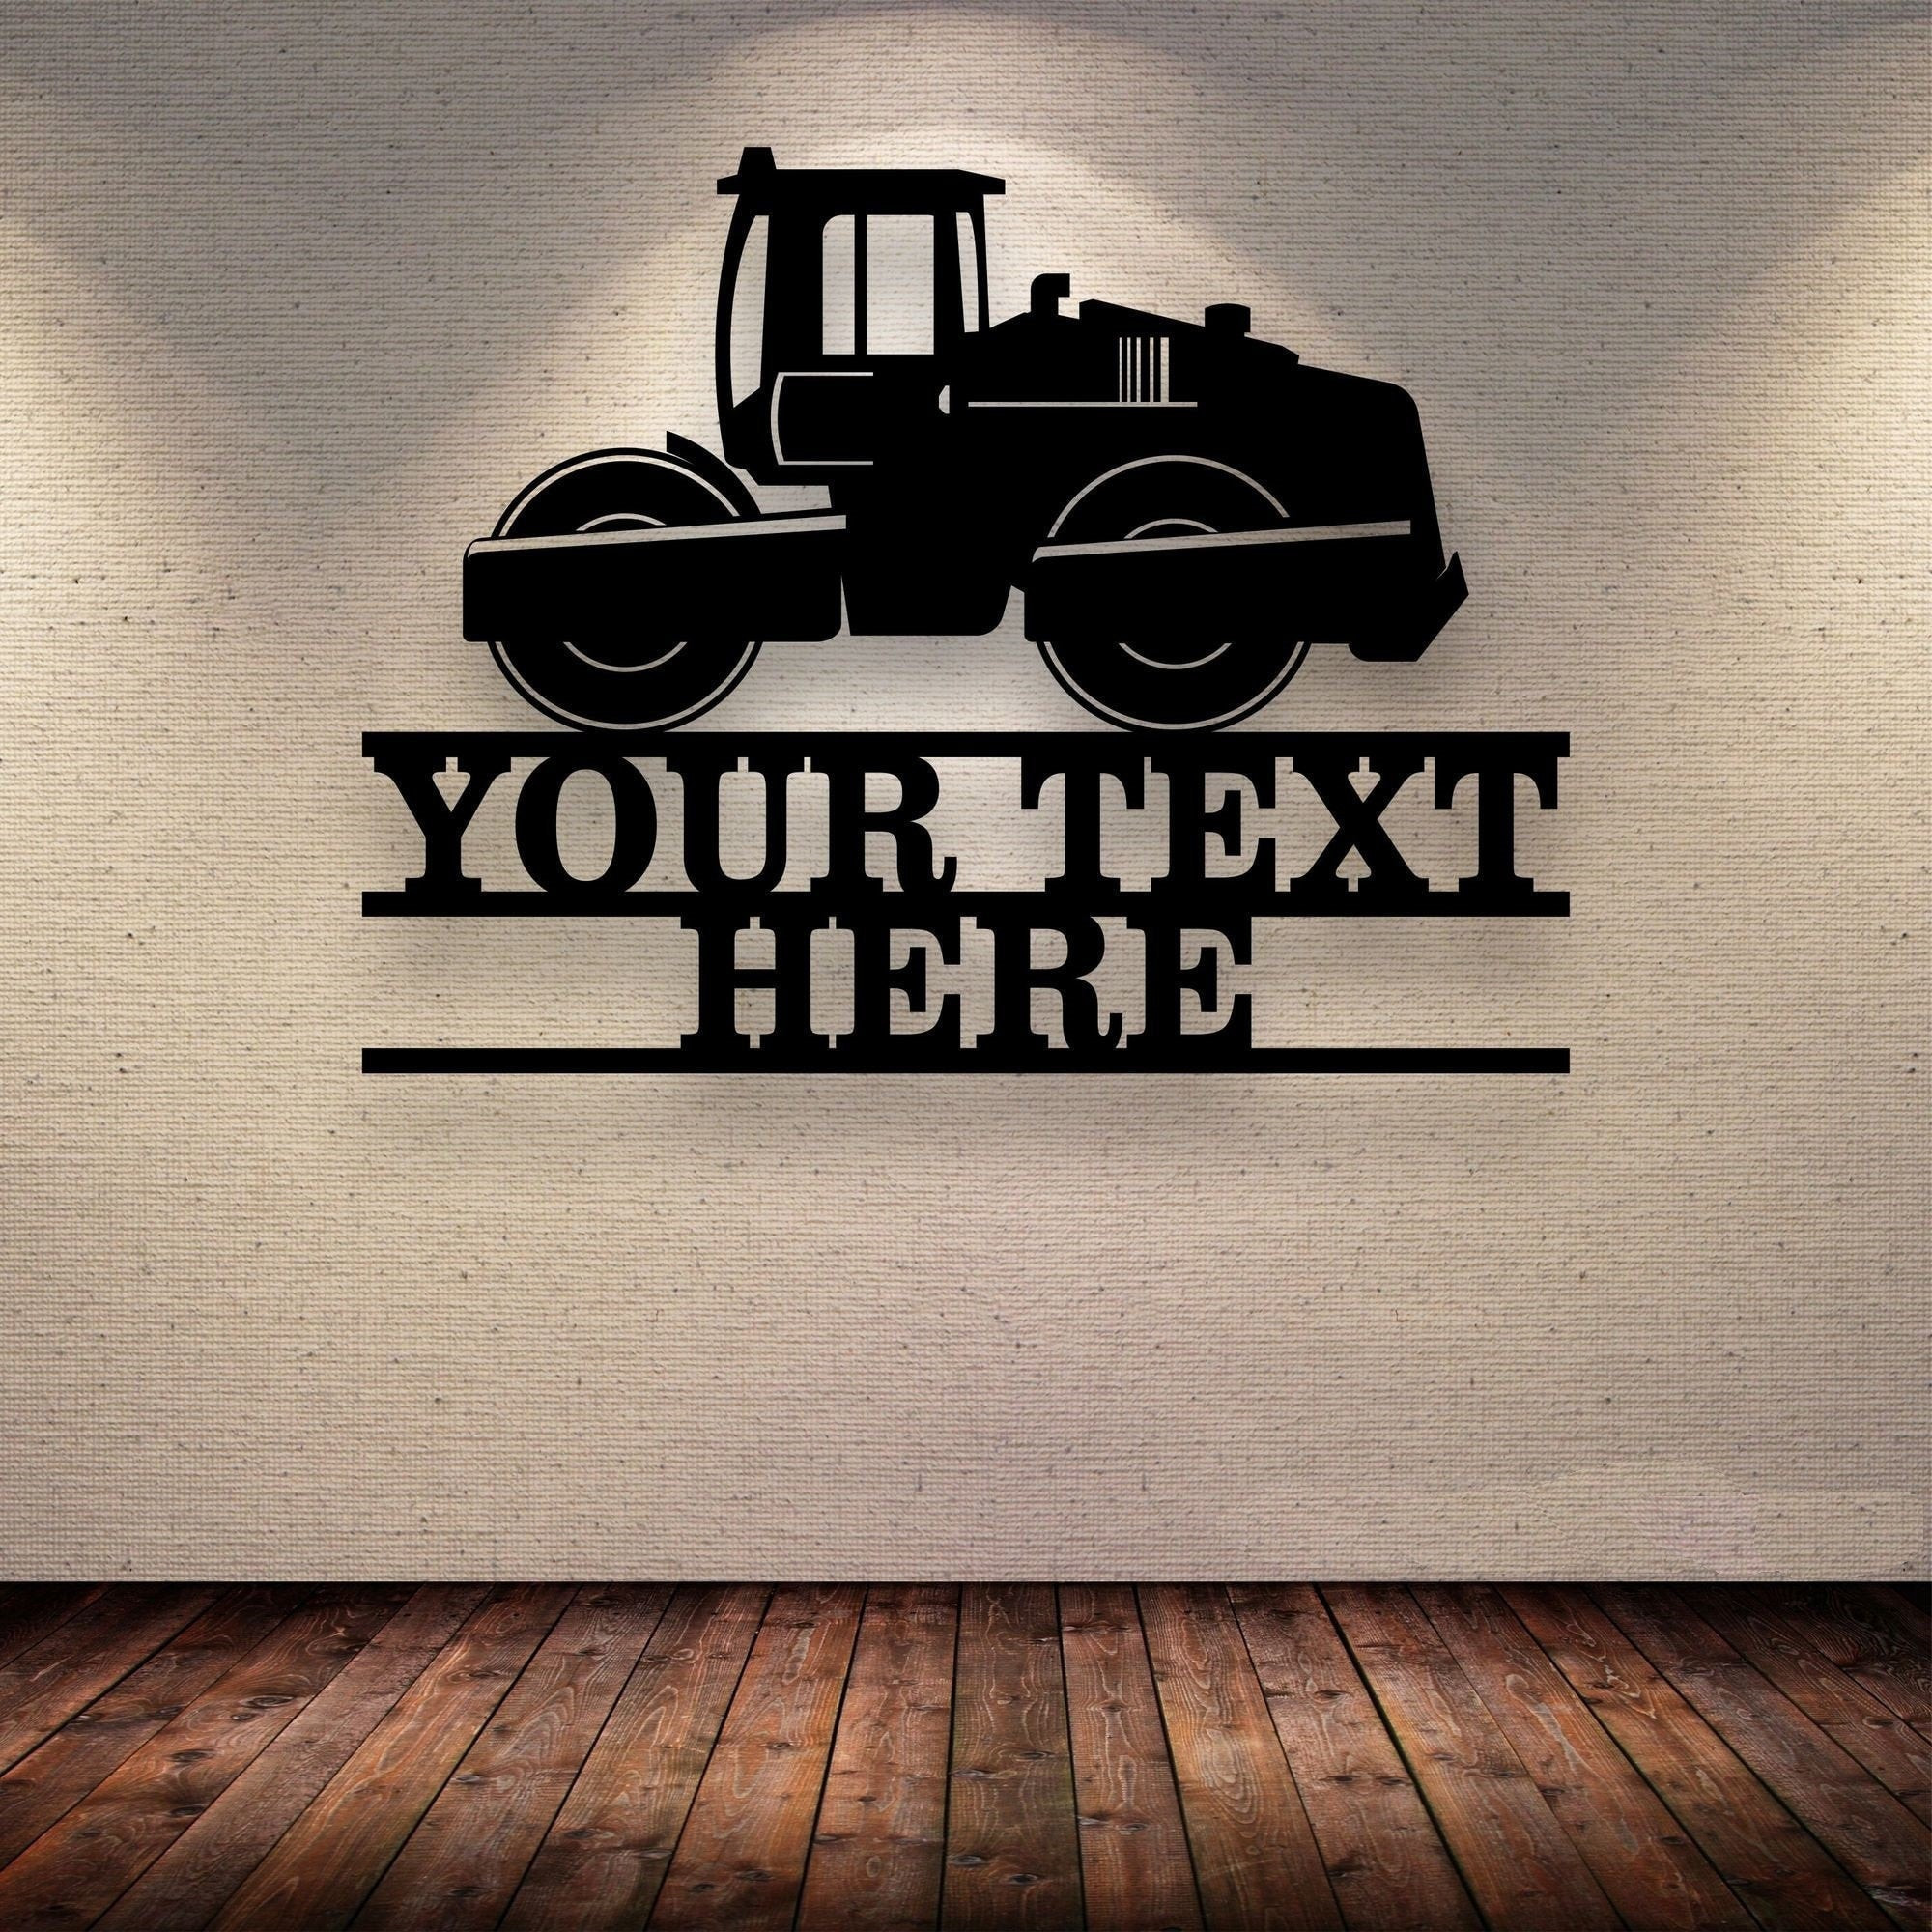 Personalized Tractor Metal Sign, Custom Name Metal Sign, Farmhouse Decor, Sign For Farmhouse, Gift For Farmer, Tractor Car Metal, Laser Cut Metal Signs Custom Gift Ideas 12x12IN